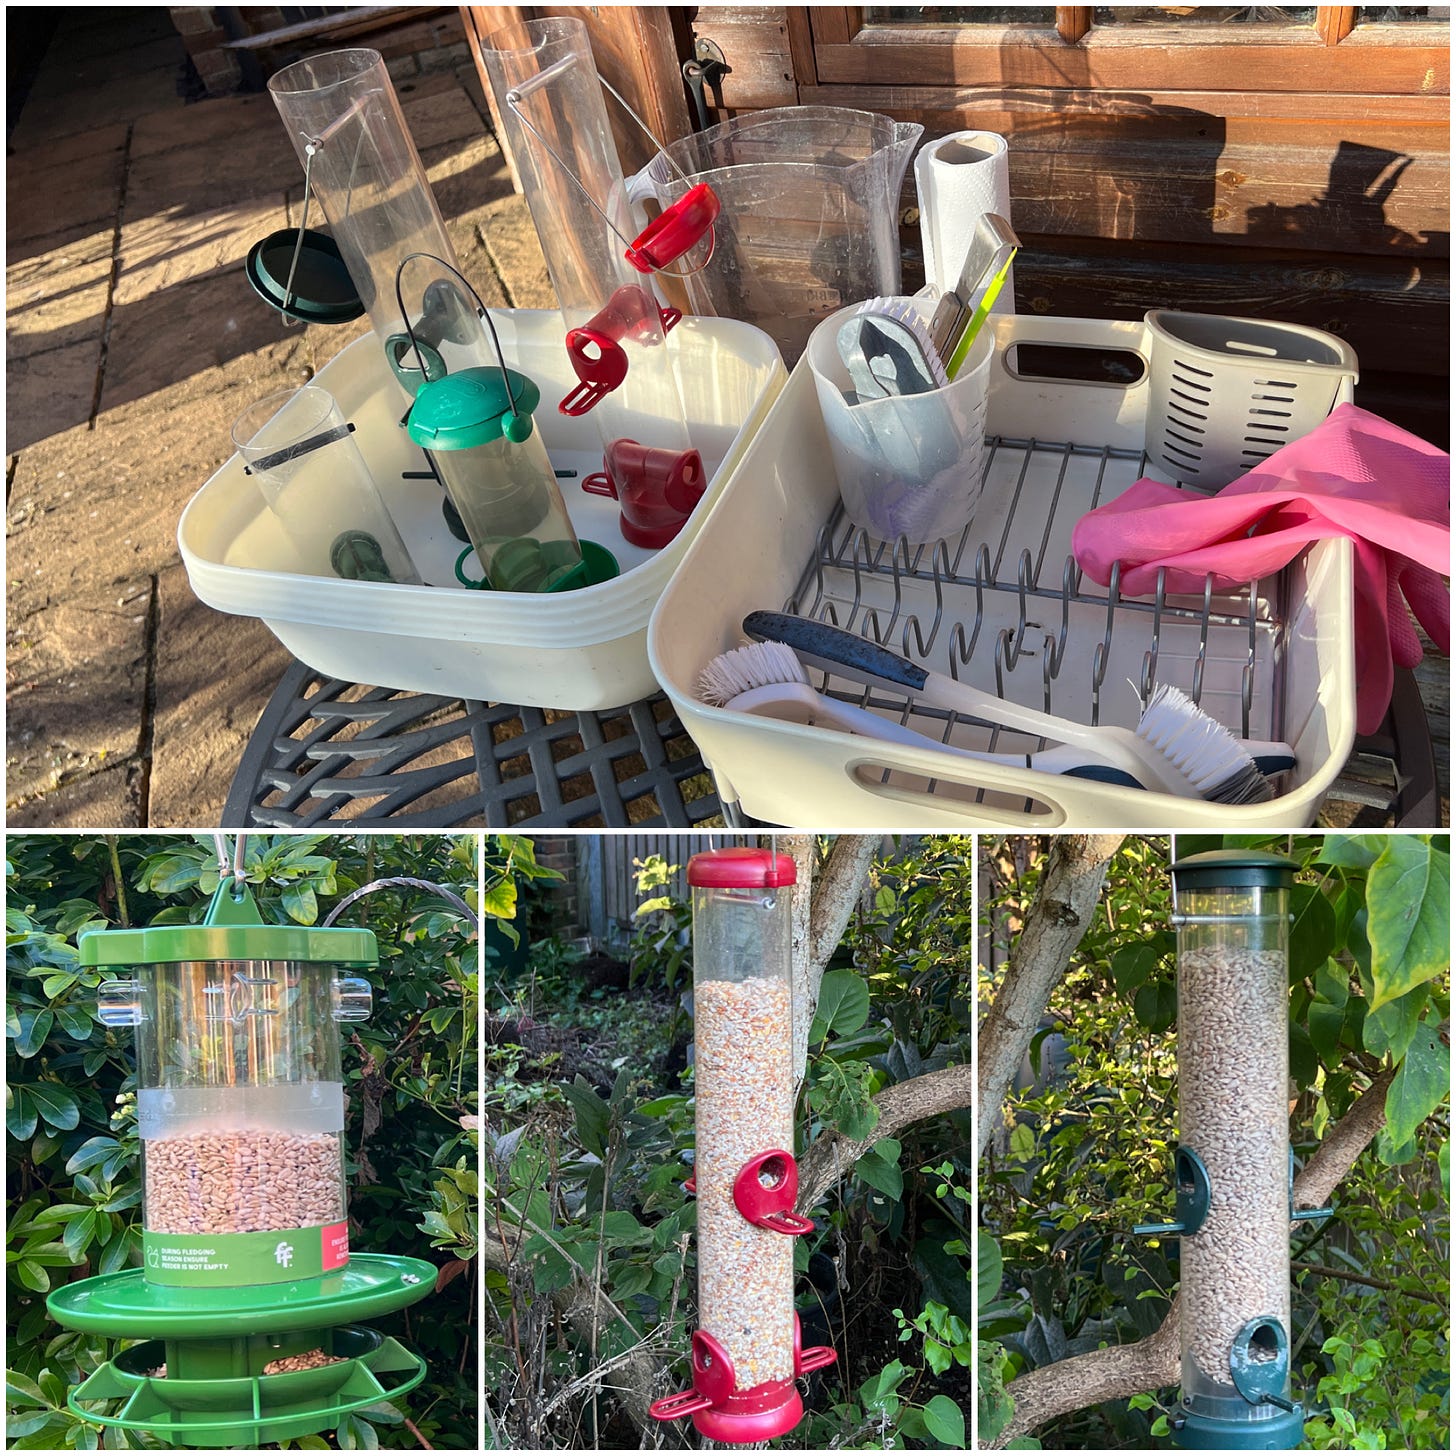  photo collage showing 4 photos, one on top and three smaller photos below.  The top photo shows a garden table with a washing up bowl and a dish drainer on top. Newly-cleaned feeders stand up in the bowl, and cleaning brushes and rubber gloves are on the drainer.  On the bottom row, photo 1 shows a Finches Friend feeder, with a green lid and base, partially filled with sunflower hearts.  Photo 2 shows a feeder tube with a red top, base and feeder ports, containing no-mess seed mix. Photo 3 shows a feeder tube with a green top, base and ports, containing sunflower hearts.